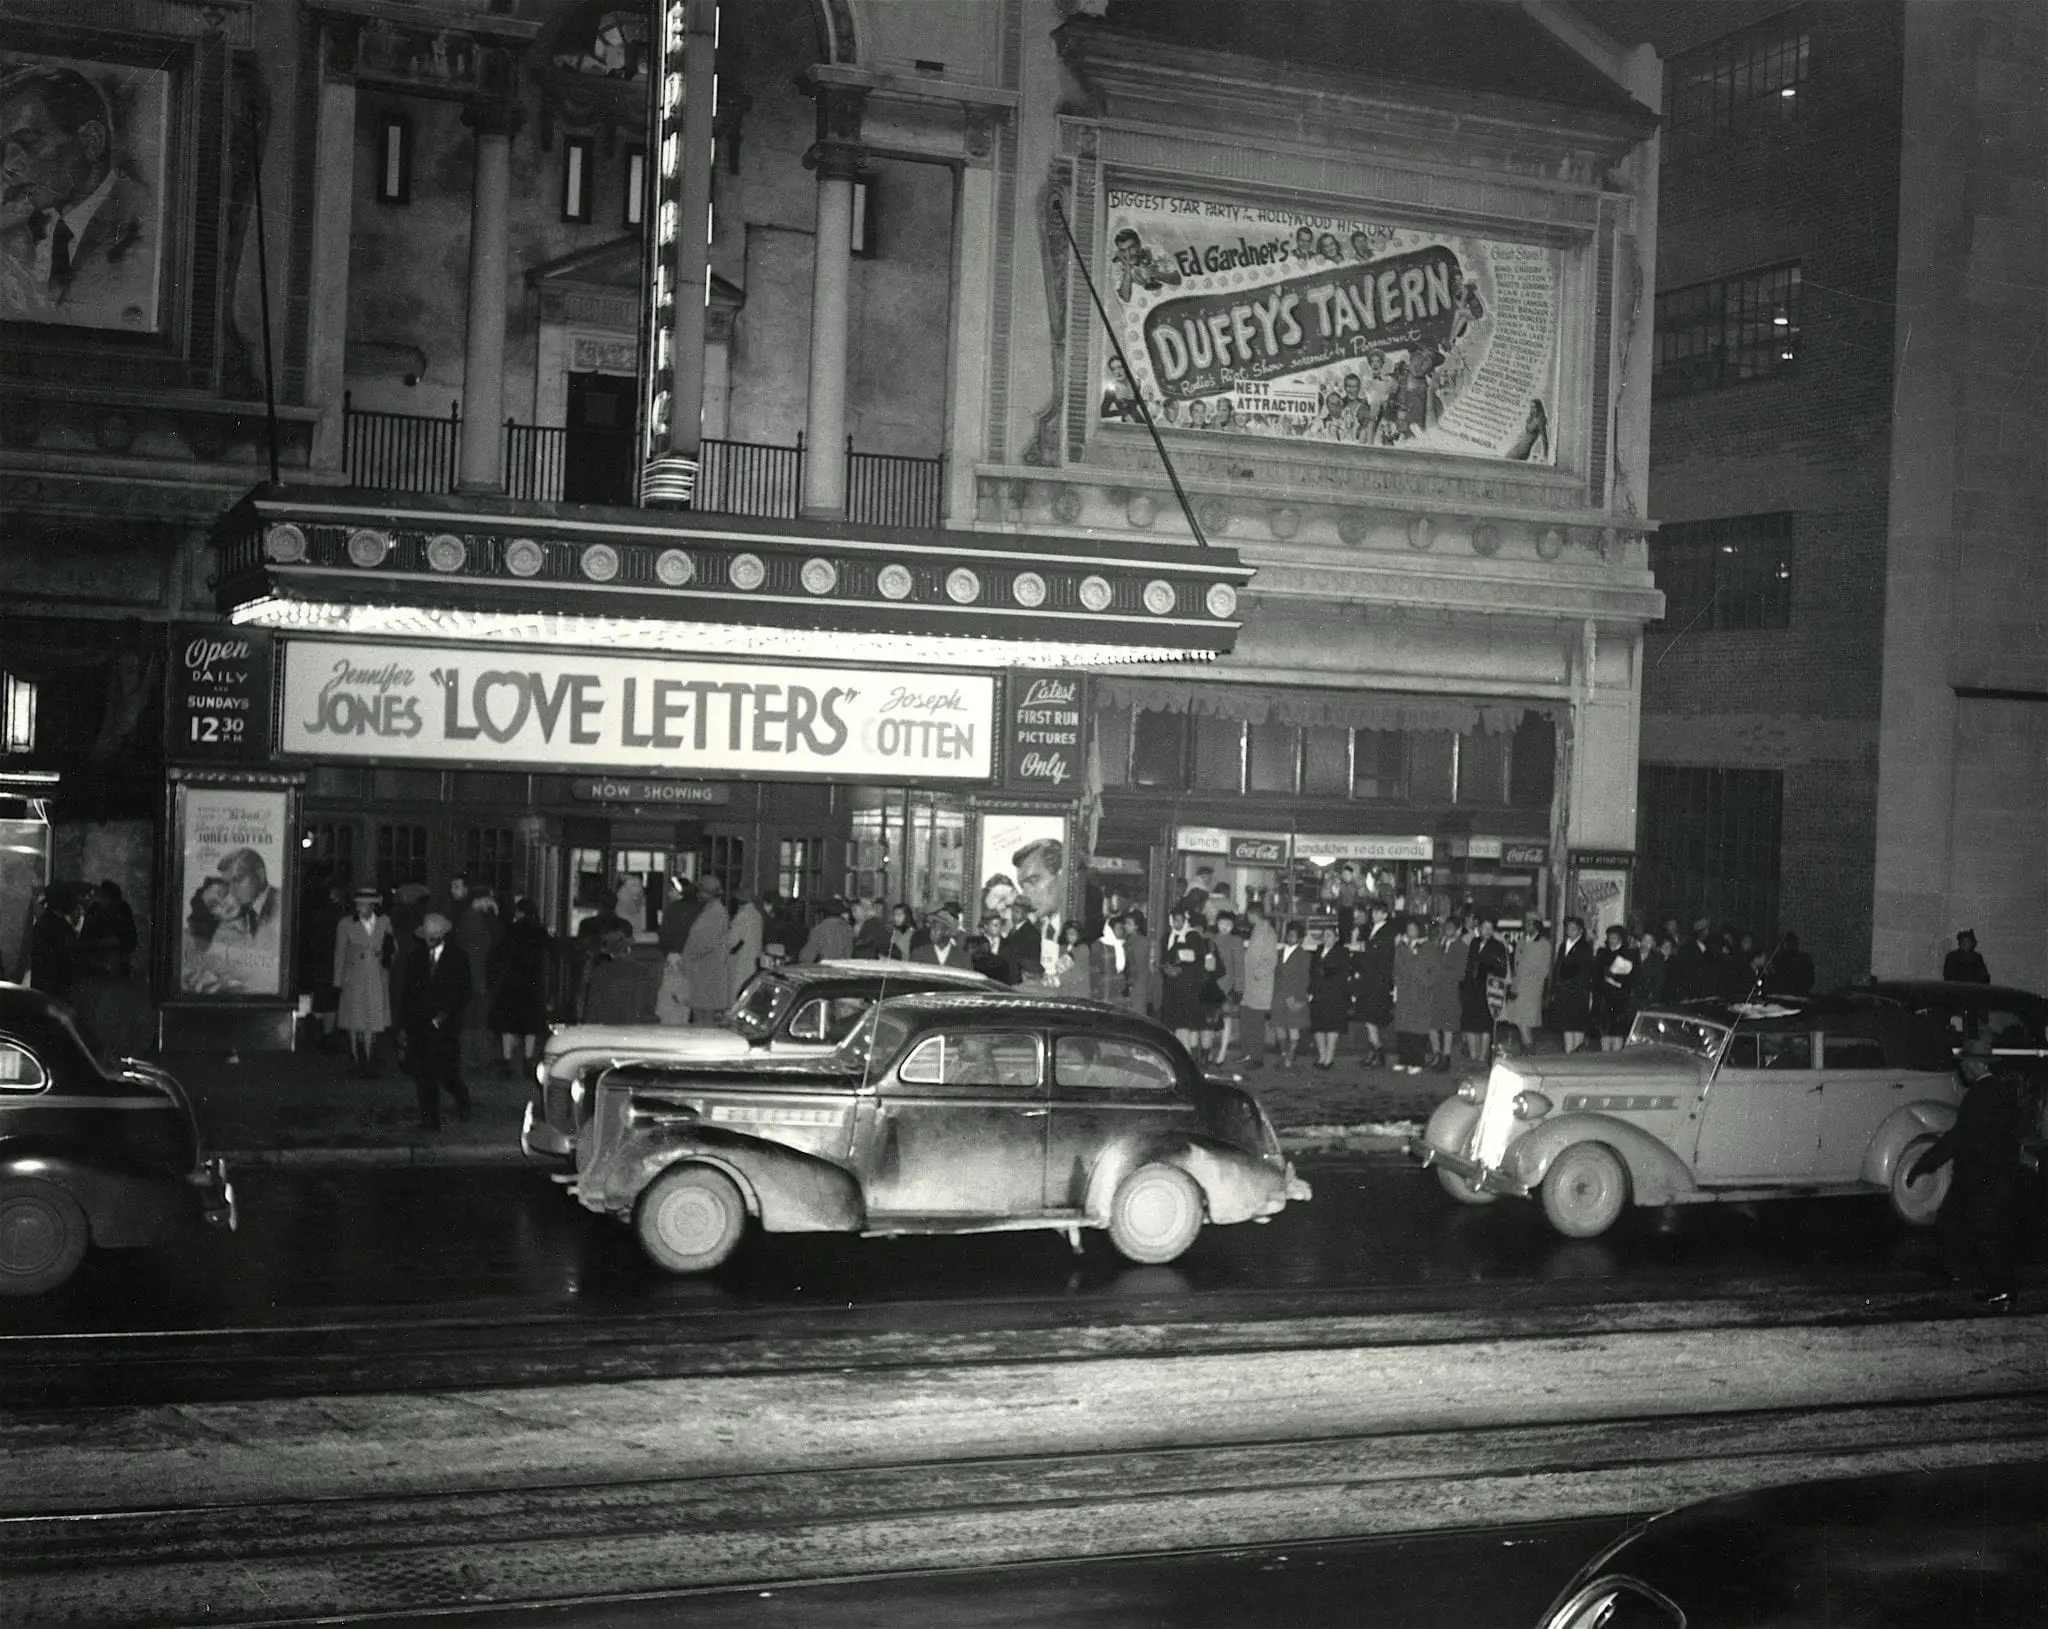 A crowd lines up for the movie, "Love Letters," starrring Jennifer Jones and Joseph Cotton, at the Republic Theatre on the north side of the 1300 block of U Street, 1945-1946.